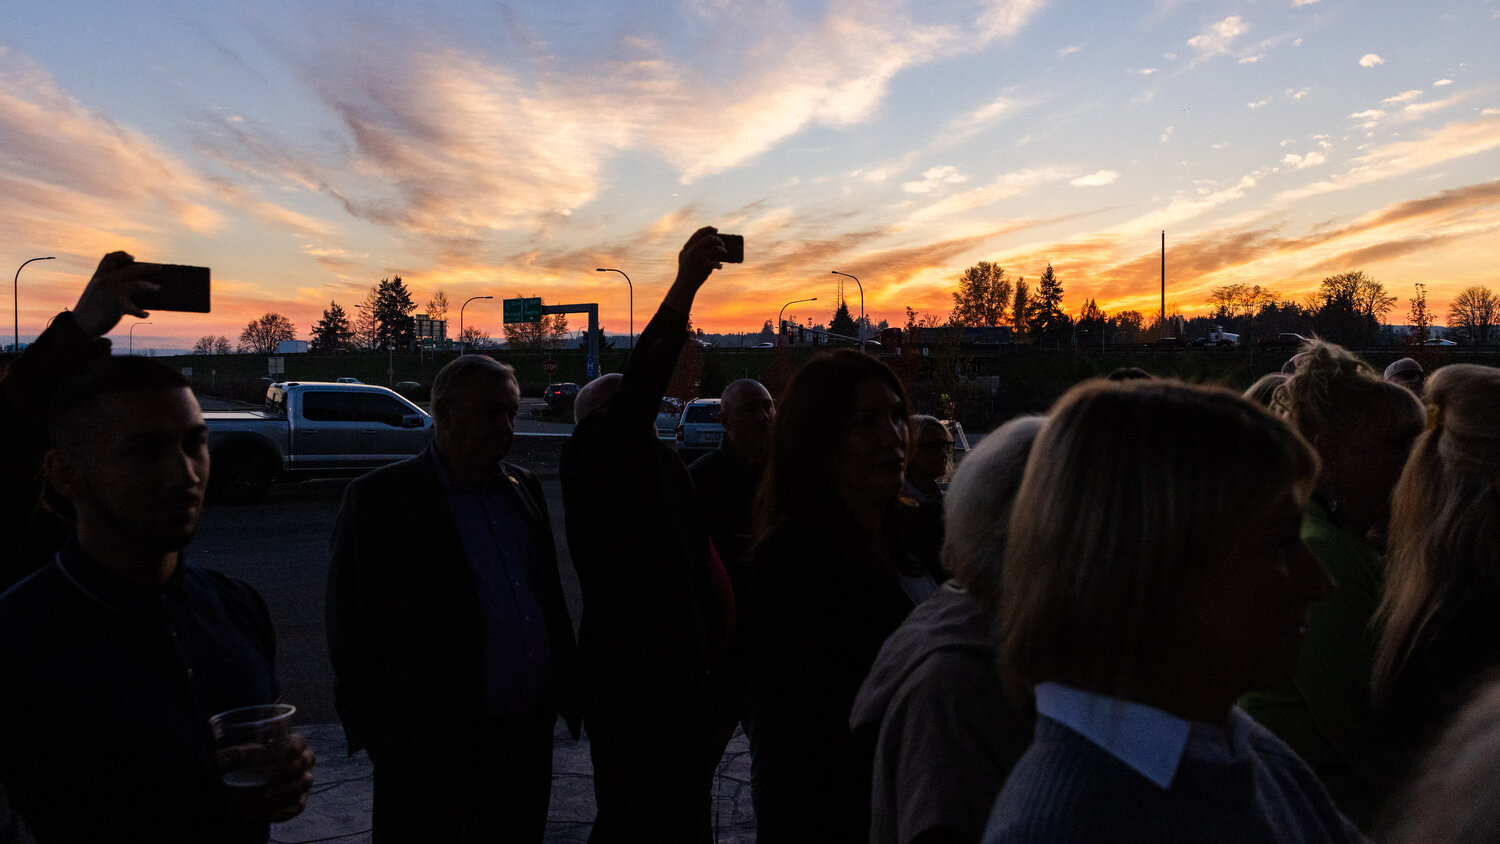 Attendees gather and watch a ribbon cutting ceremony for La Quinta by Wyndham in Centralia as the sun set Wednesday, Nov. 15.